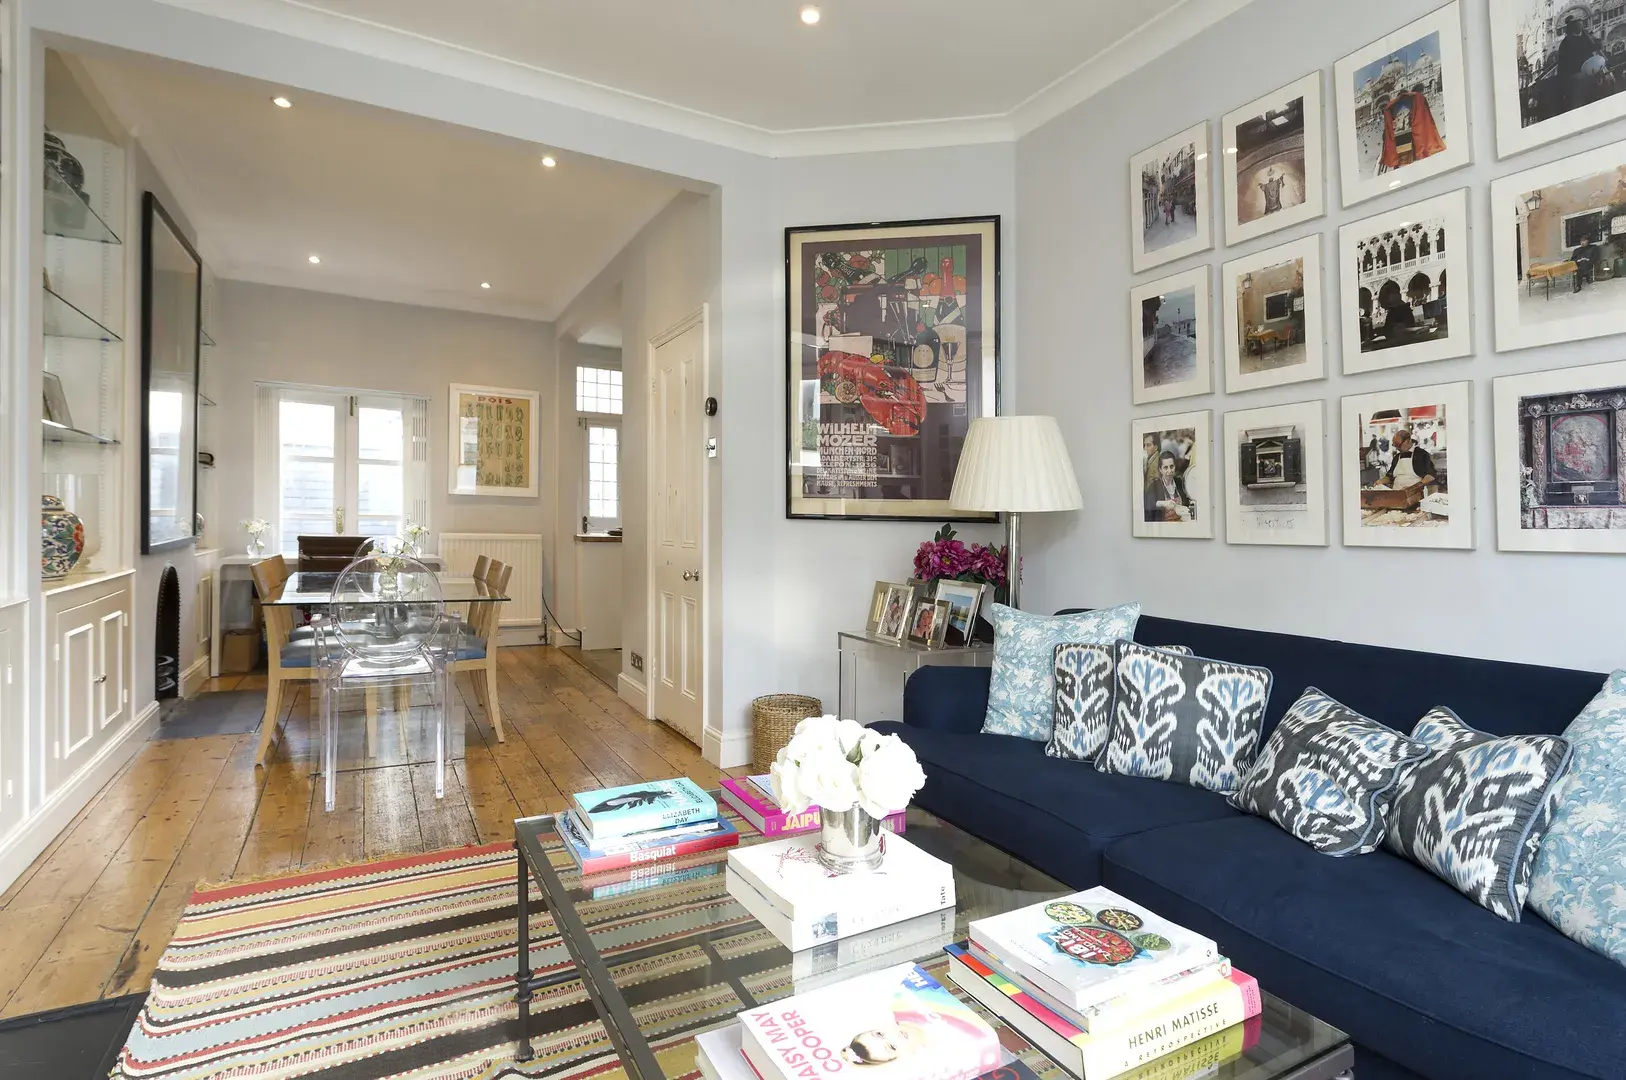 Tunis Road, holiday home in Hampstead, London